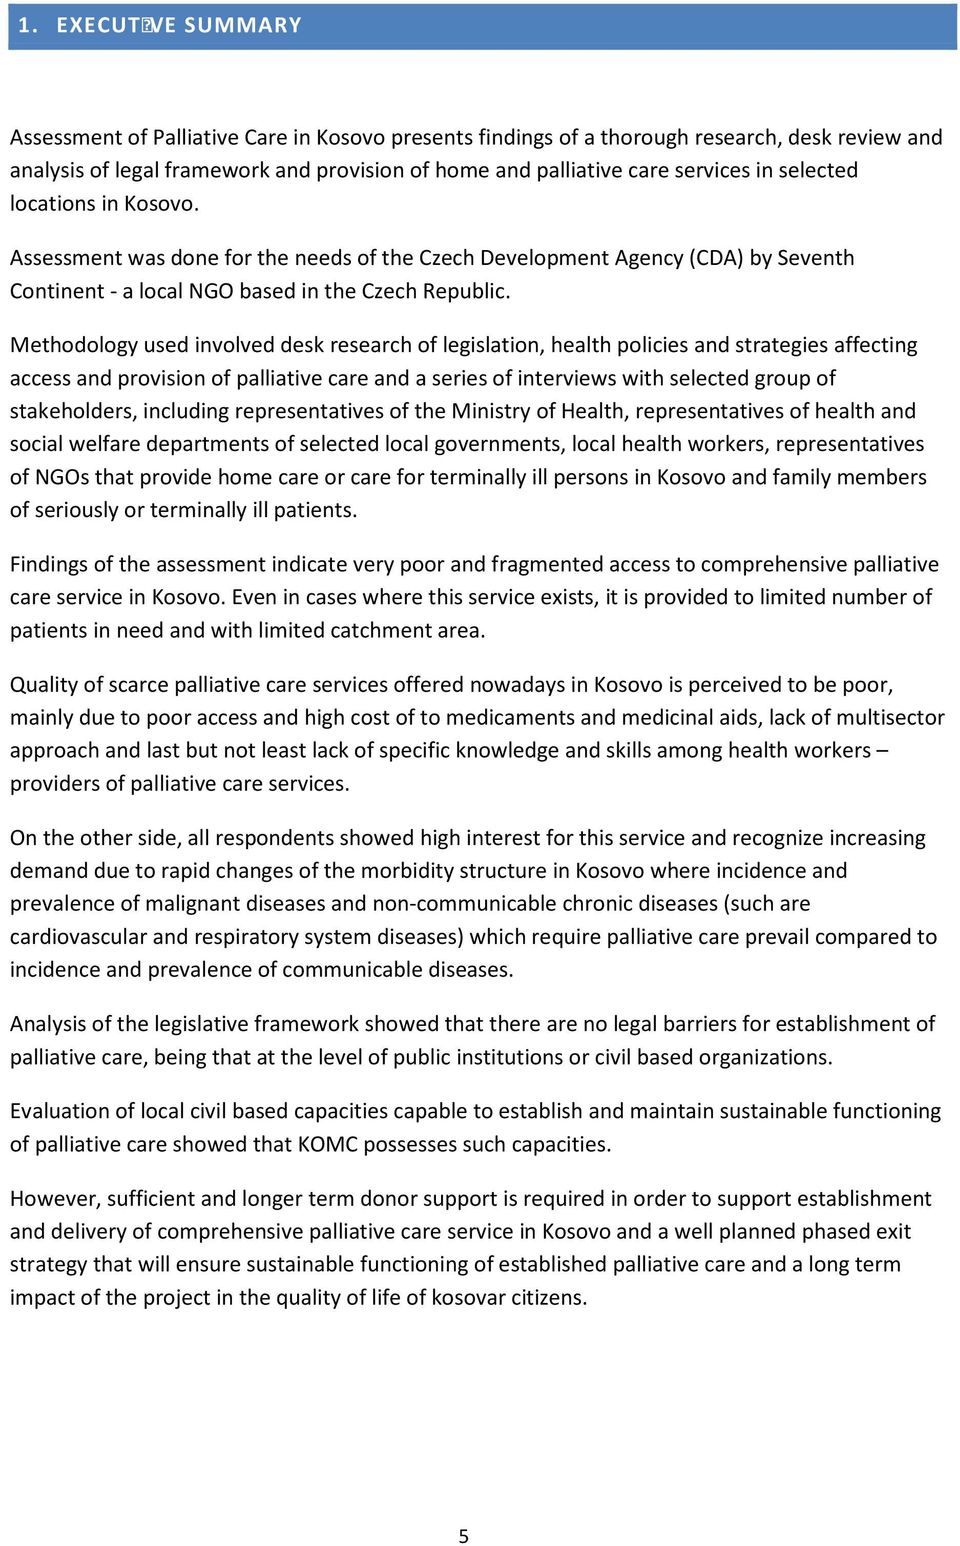 Methodology used involved desk research of legislation, health policies and strategies affecting access and provision of palliative care and a series of interviews with selected group of